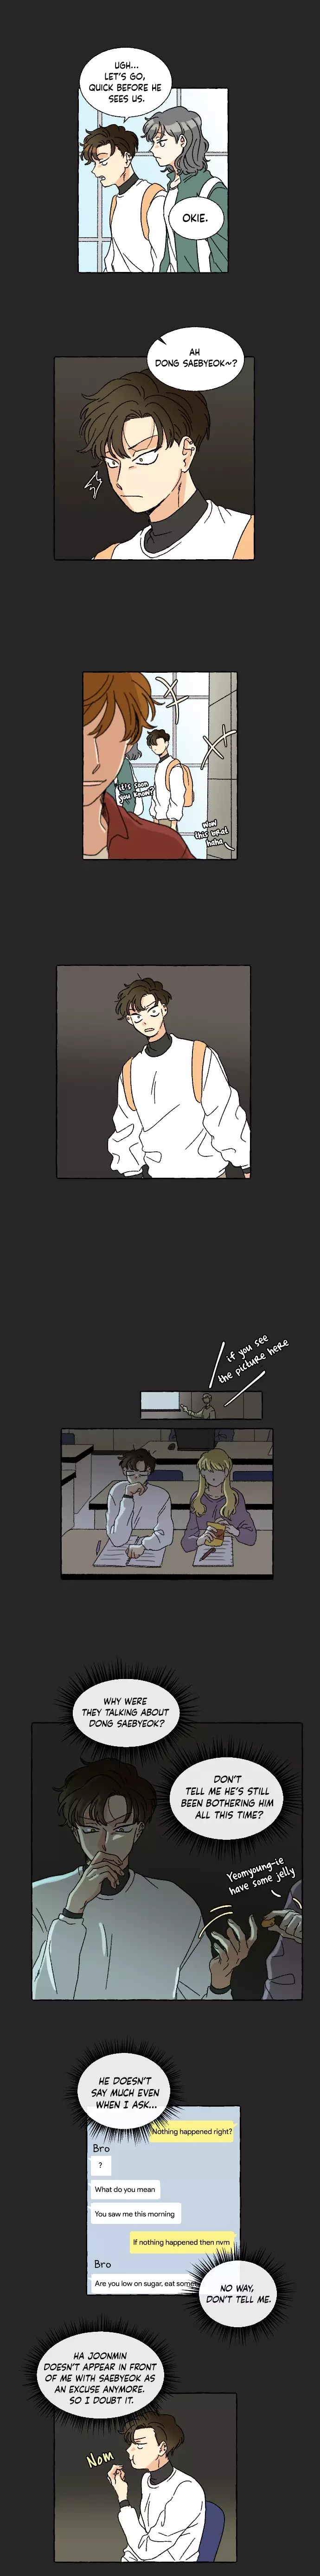 Daybreaking Romance - 9 page 3